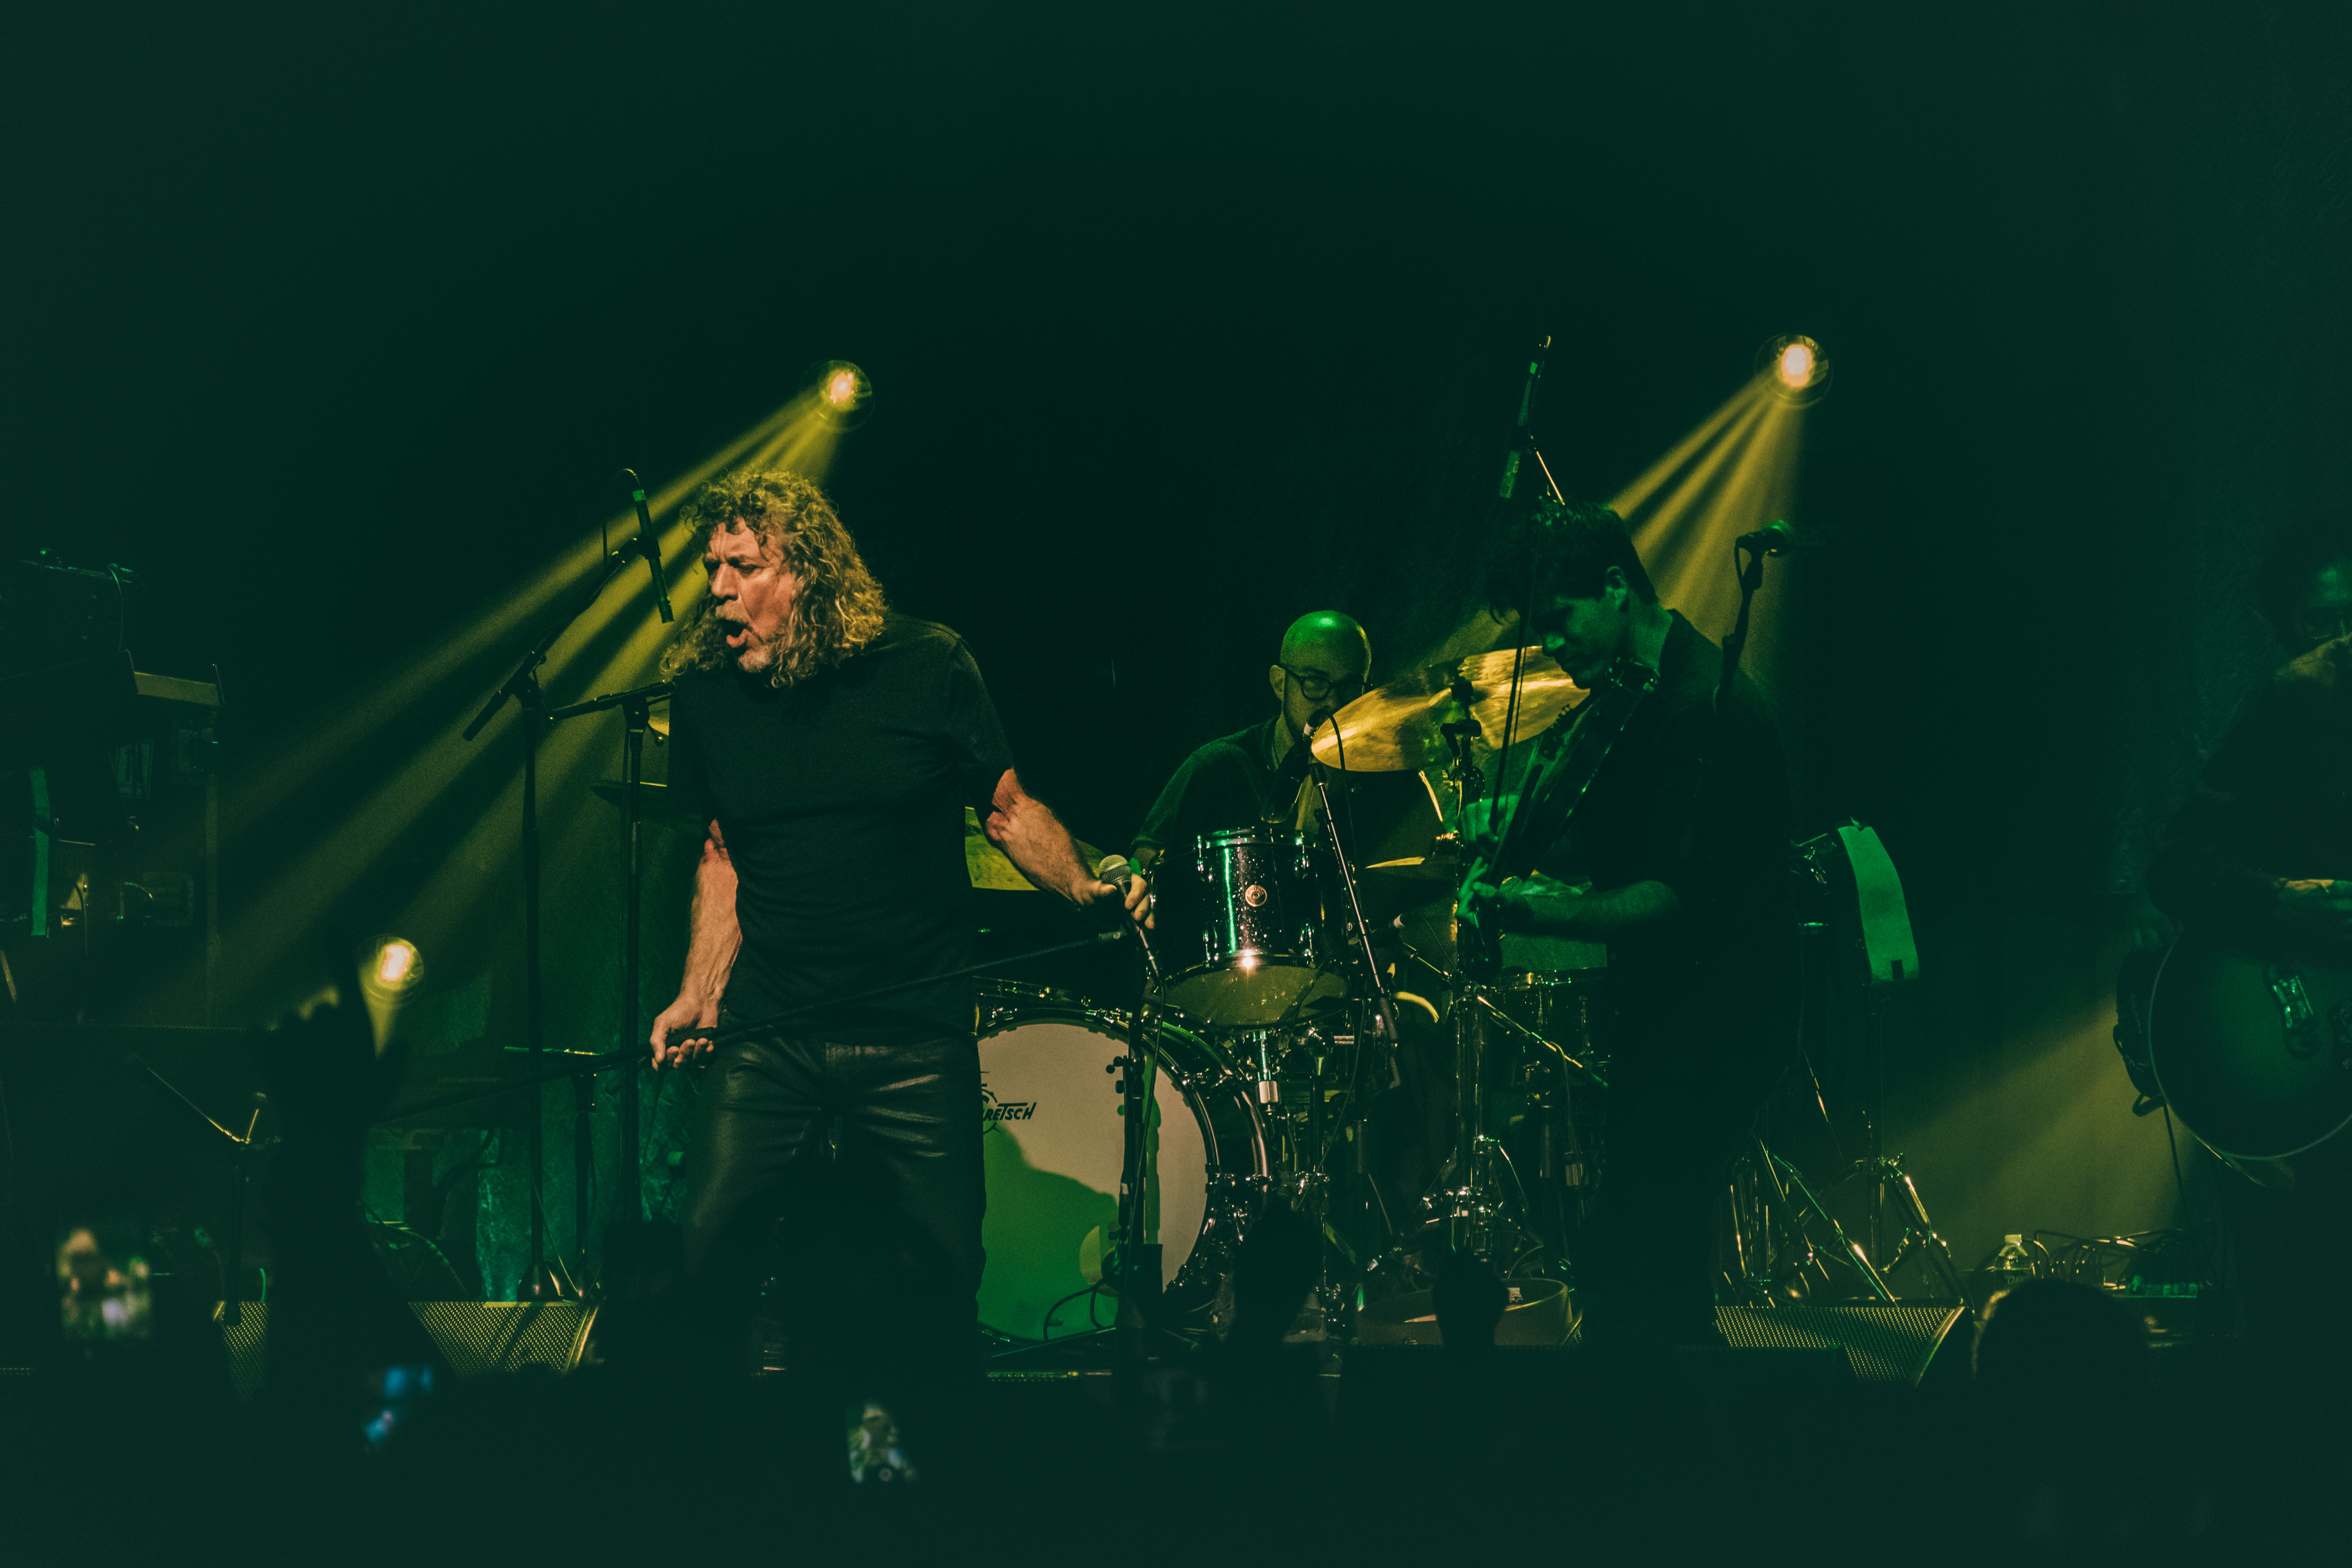 PHOTO: Robert Plant and the Sensational Space Shifters performing at the Moody Theater in Austin, TX Oct. 1. Photo by Regan Bjerkeli.